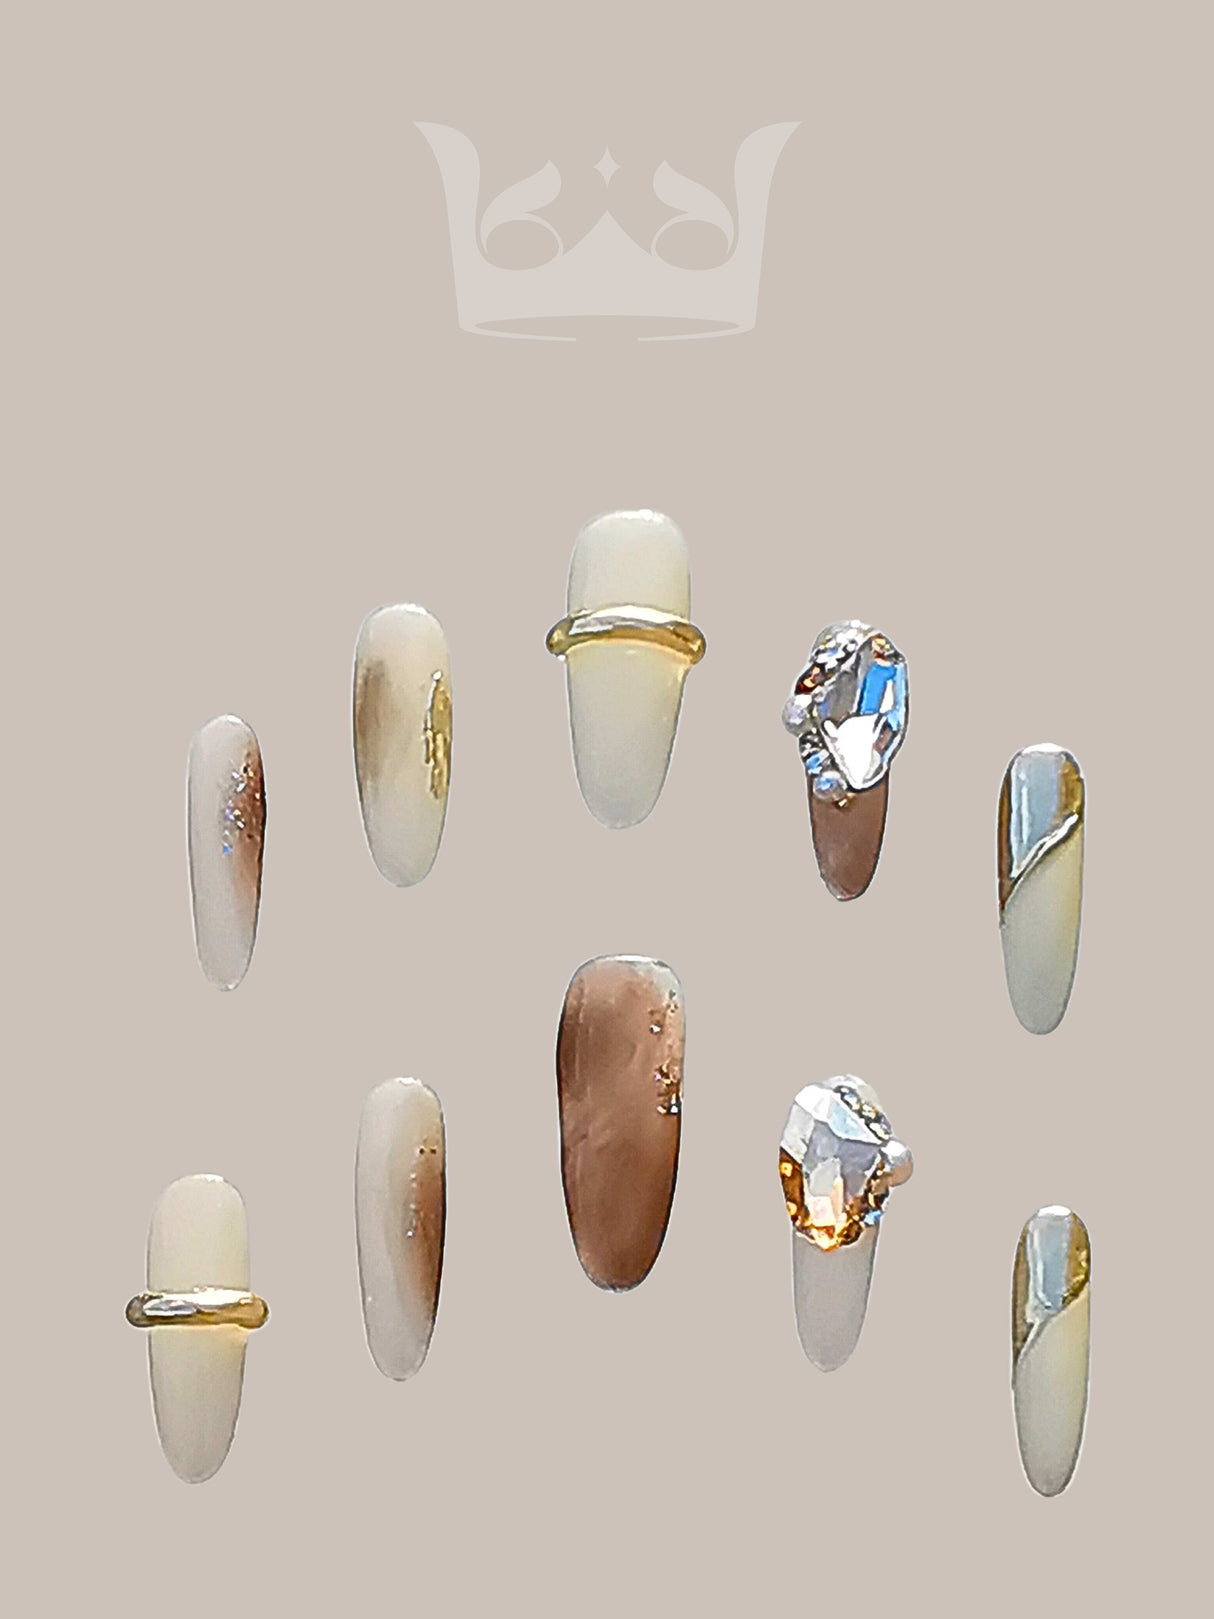 These press-on nails have a muted pastel color palette, gold bands, diamonds, and metallic accents, giving a fancy and understated style with a touch of luxury. 